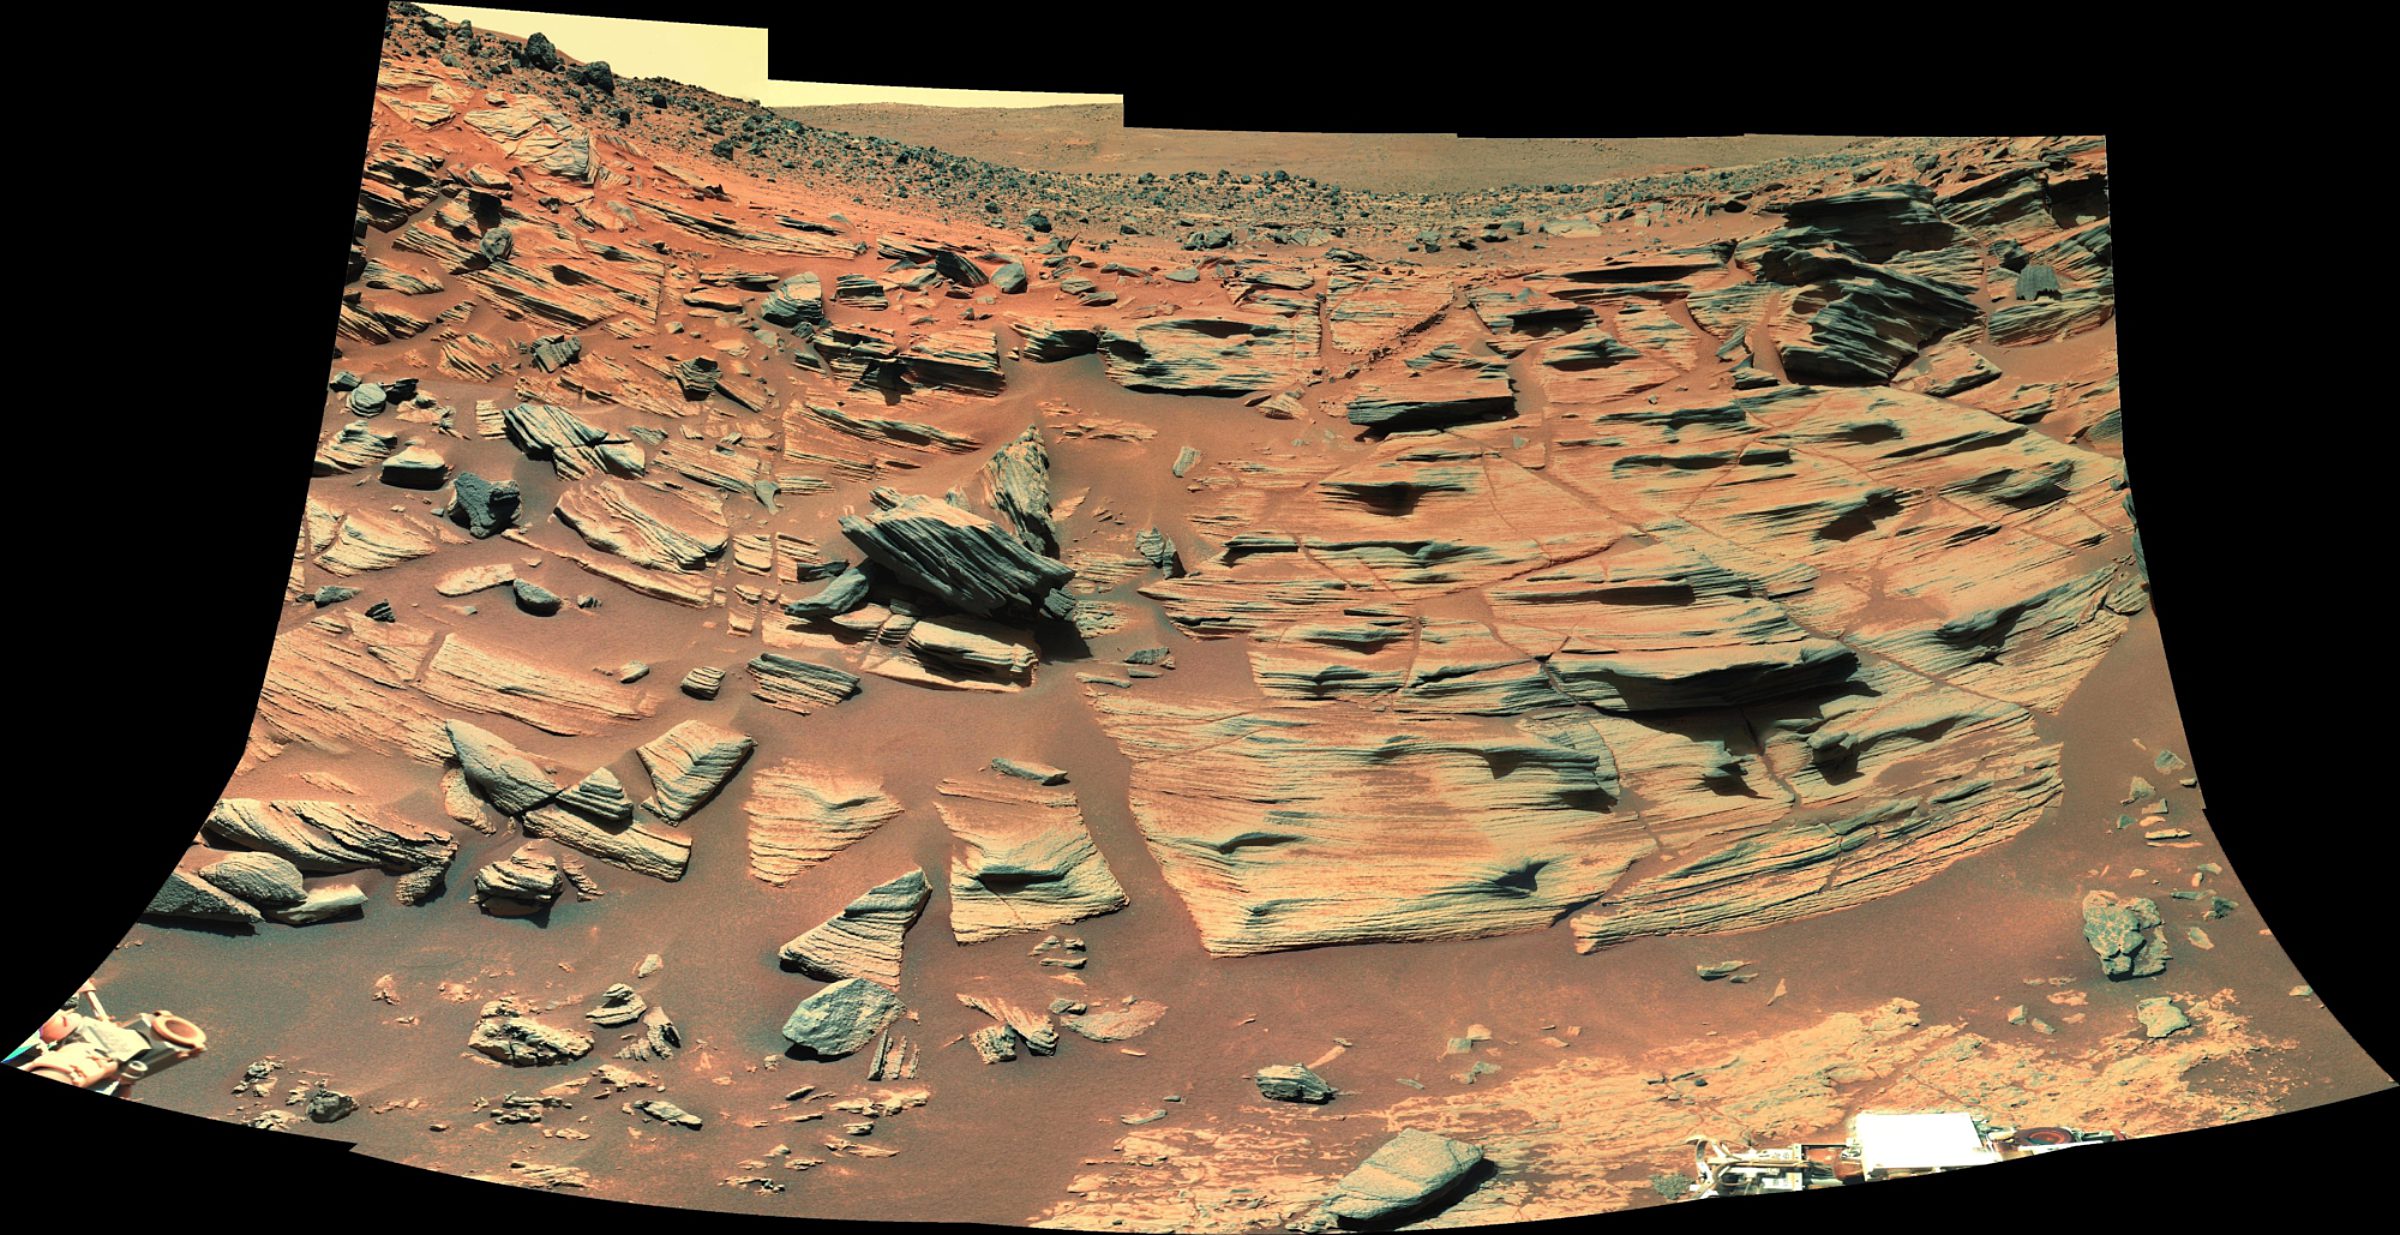 home-plate-sol-748-the-planetary-society